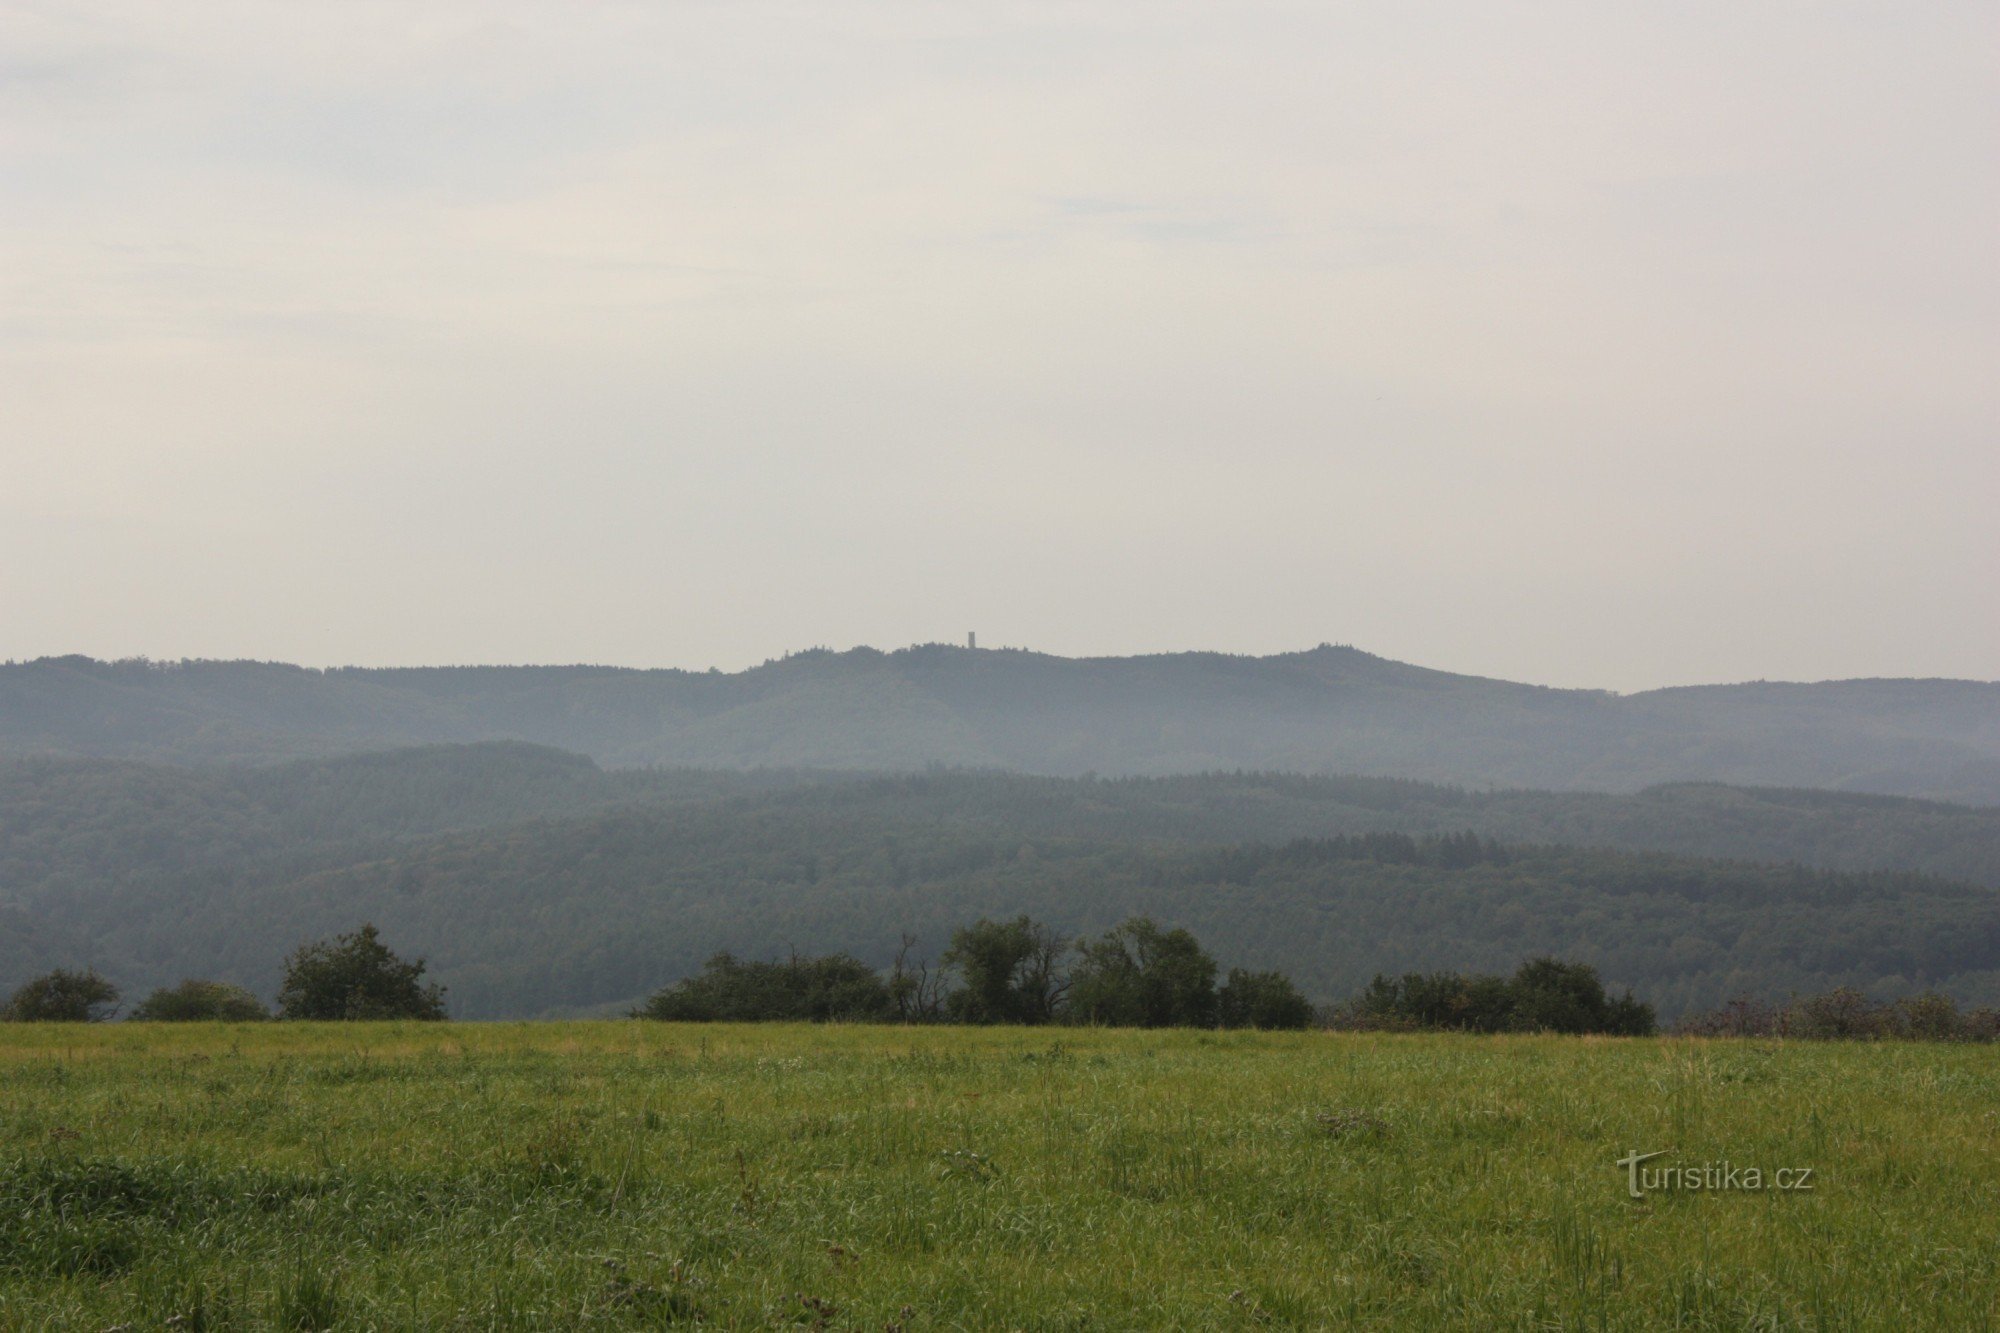 View of Chřiby from Zdounek